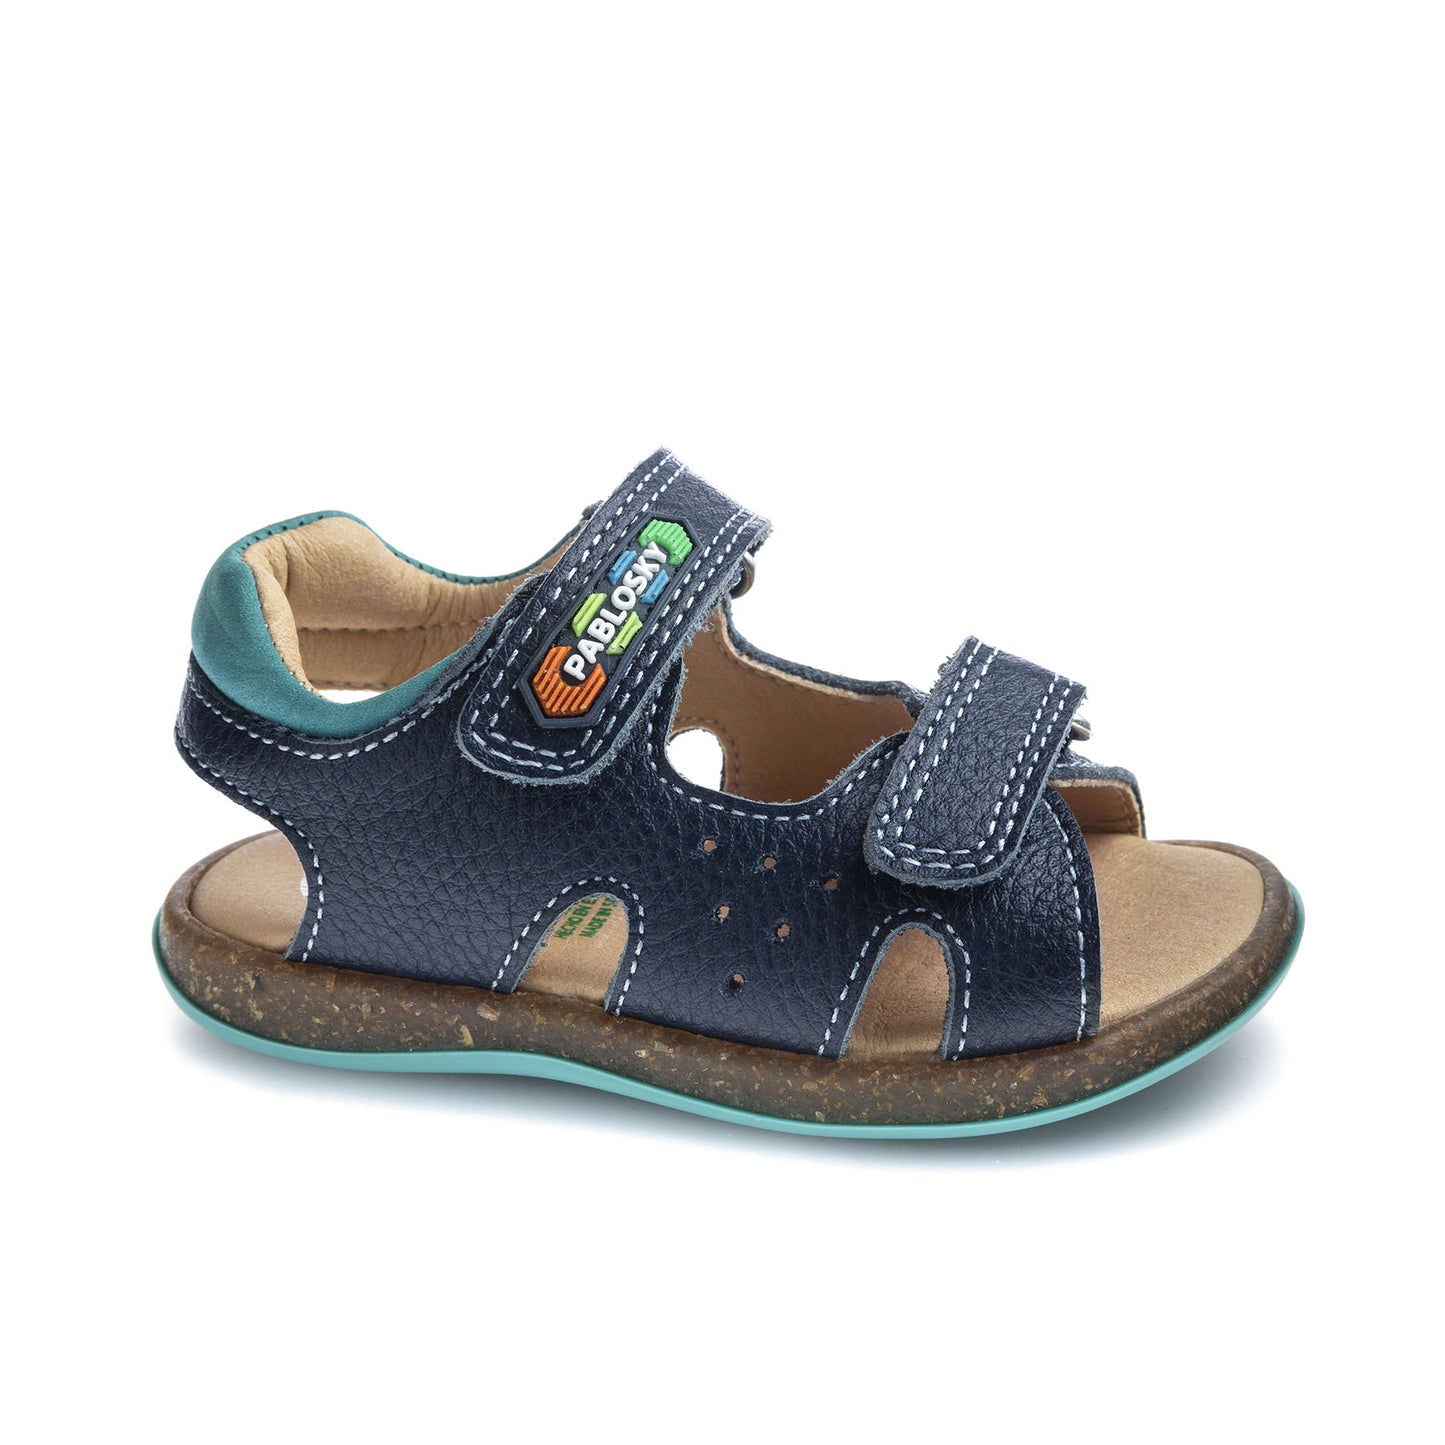 Pablosky Open-toe Toddler Sandals / 041825